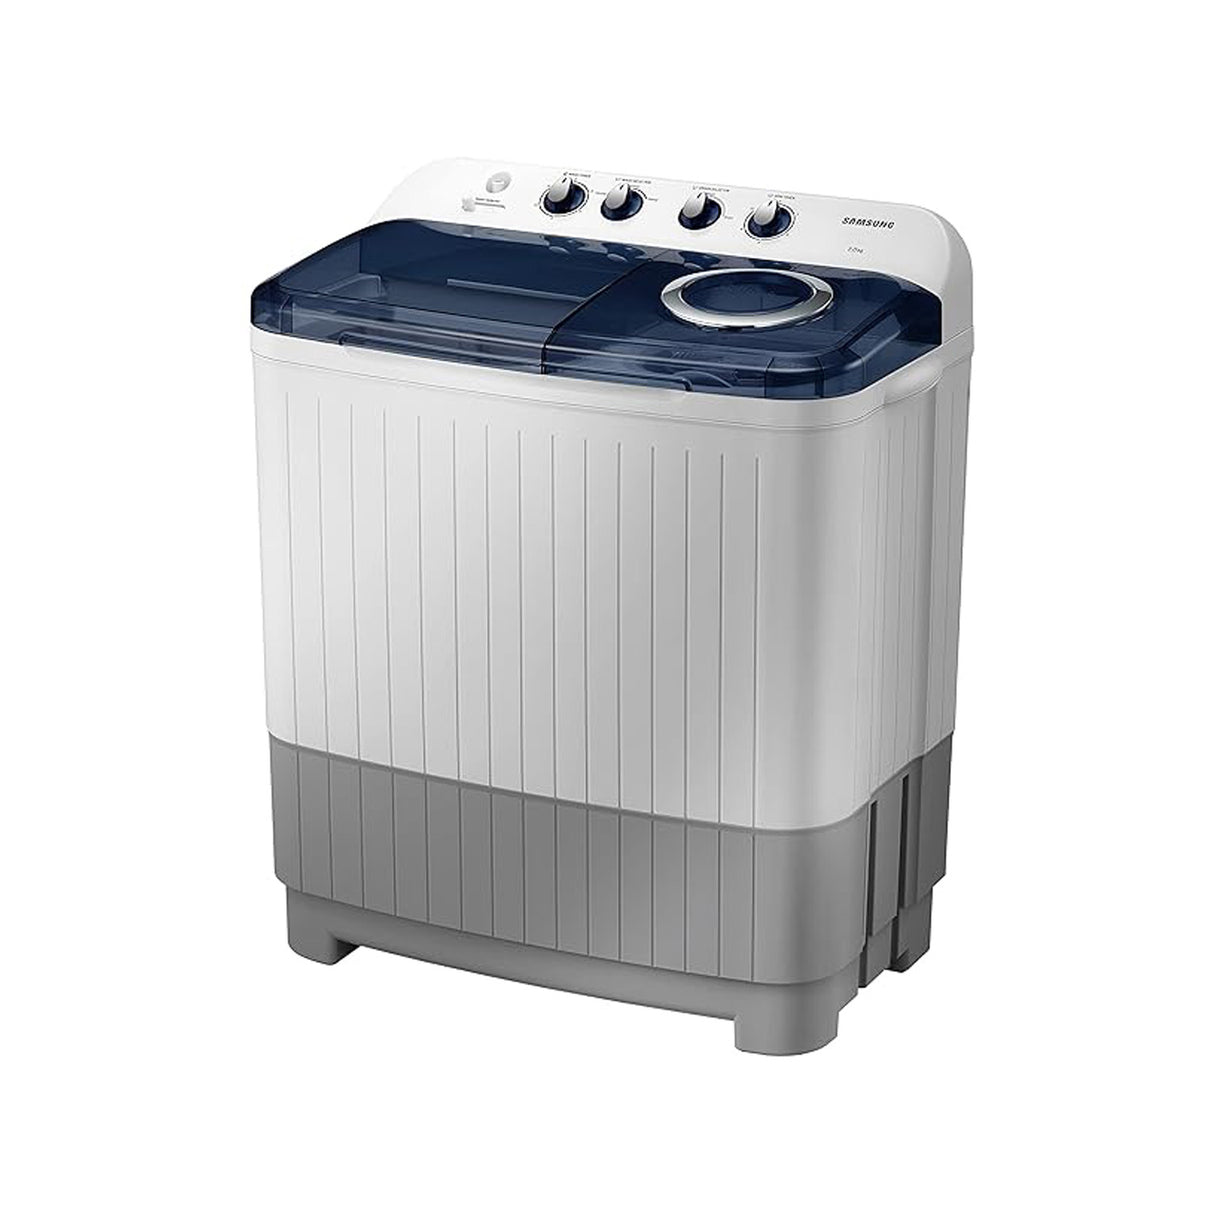 Washing Machine: Stylish Light Gray model for effective cleaning.